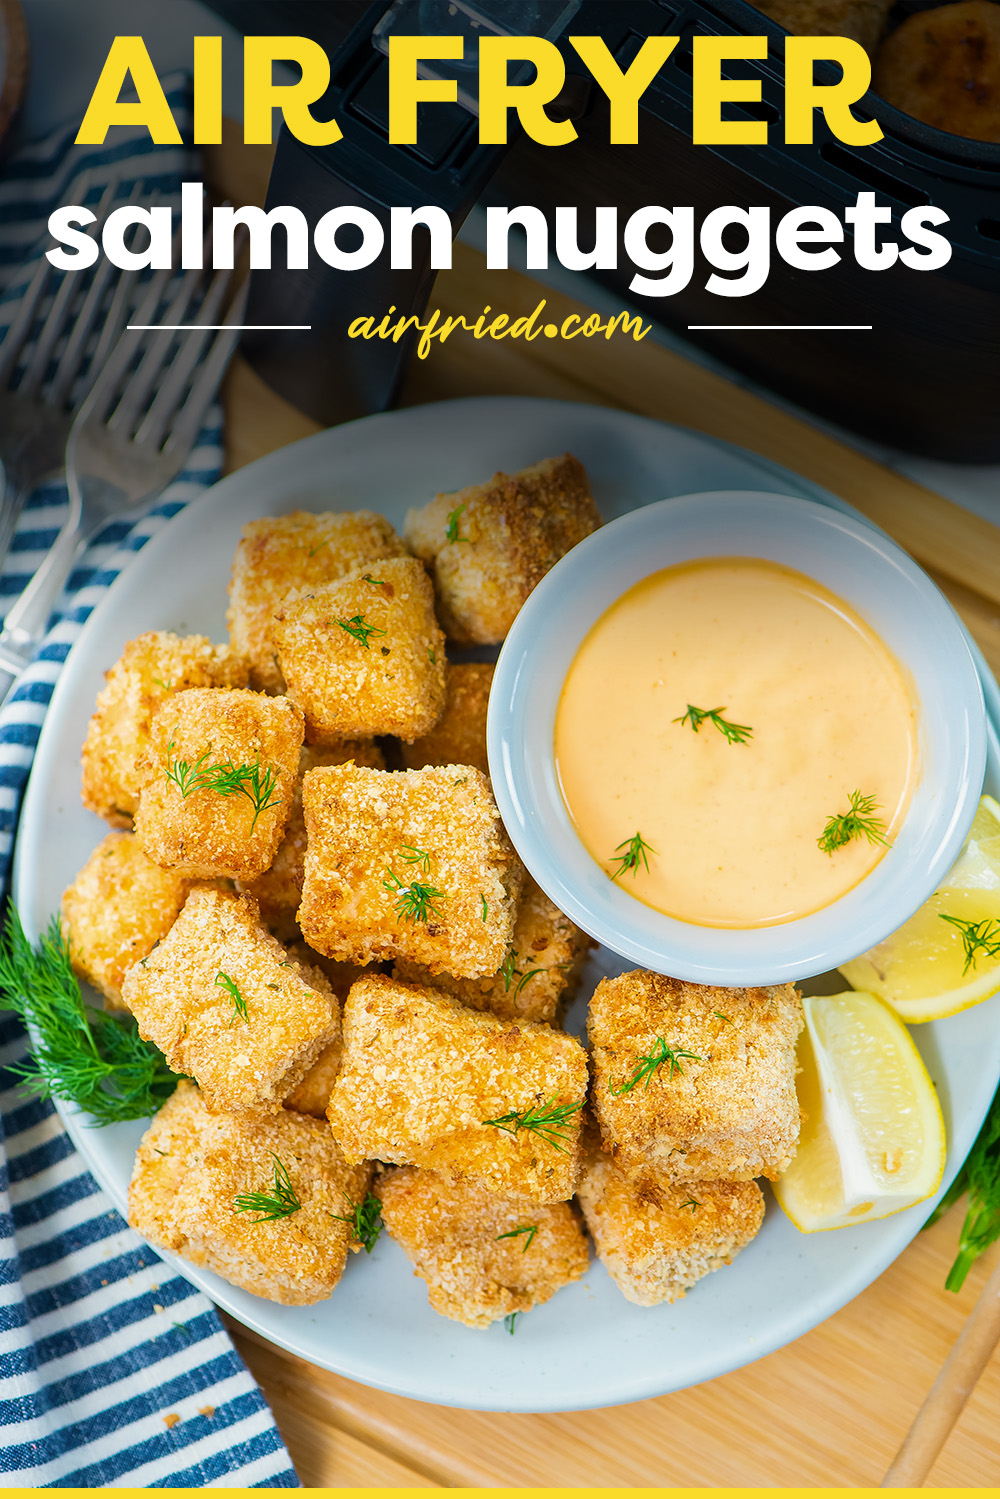 This recipe for air fryer salmon nuggets has a crisp flavorful breading.  It's easy to make and cooks in just 10 minutes!